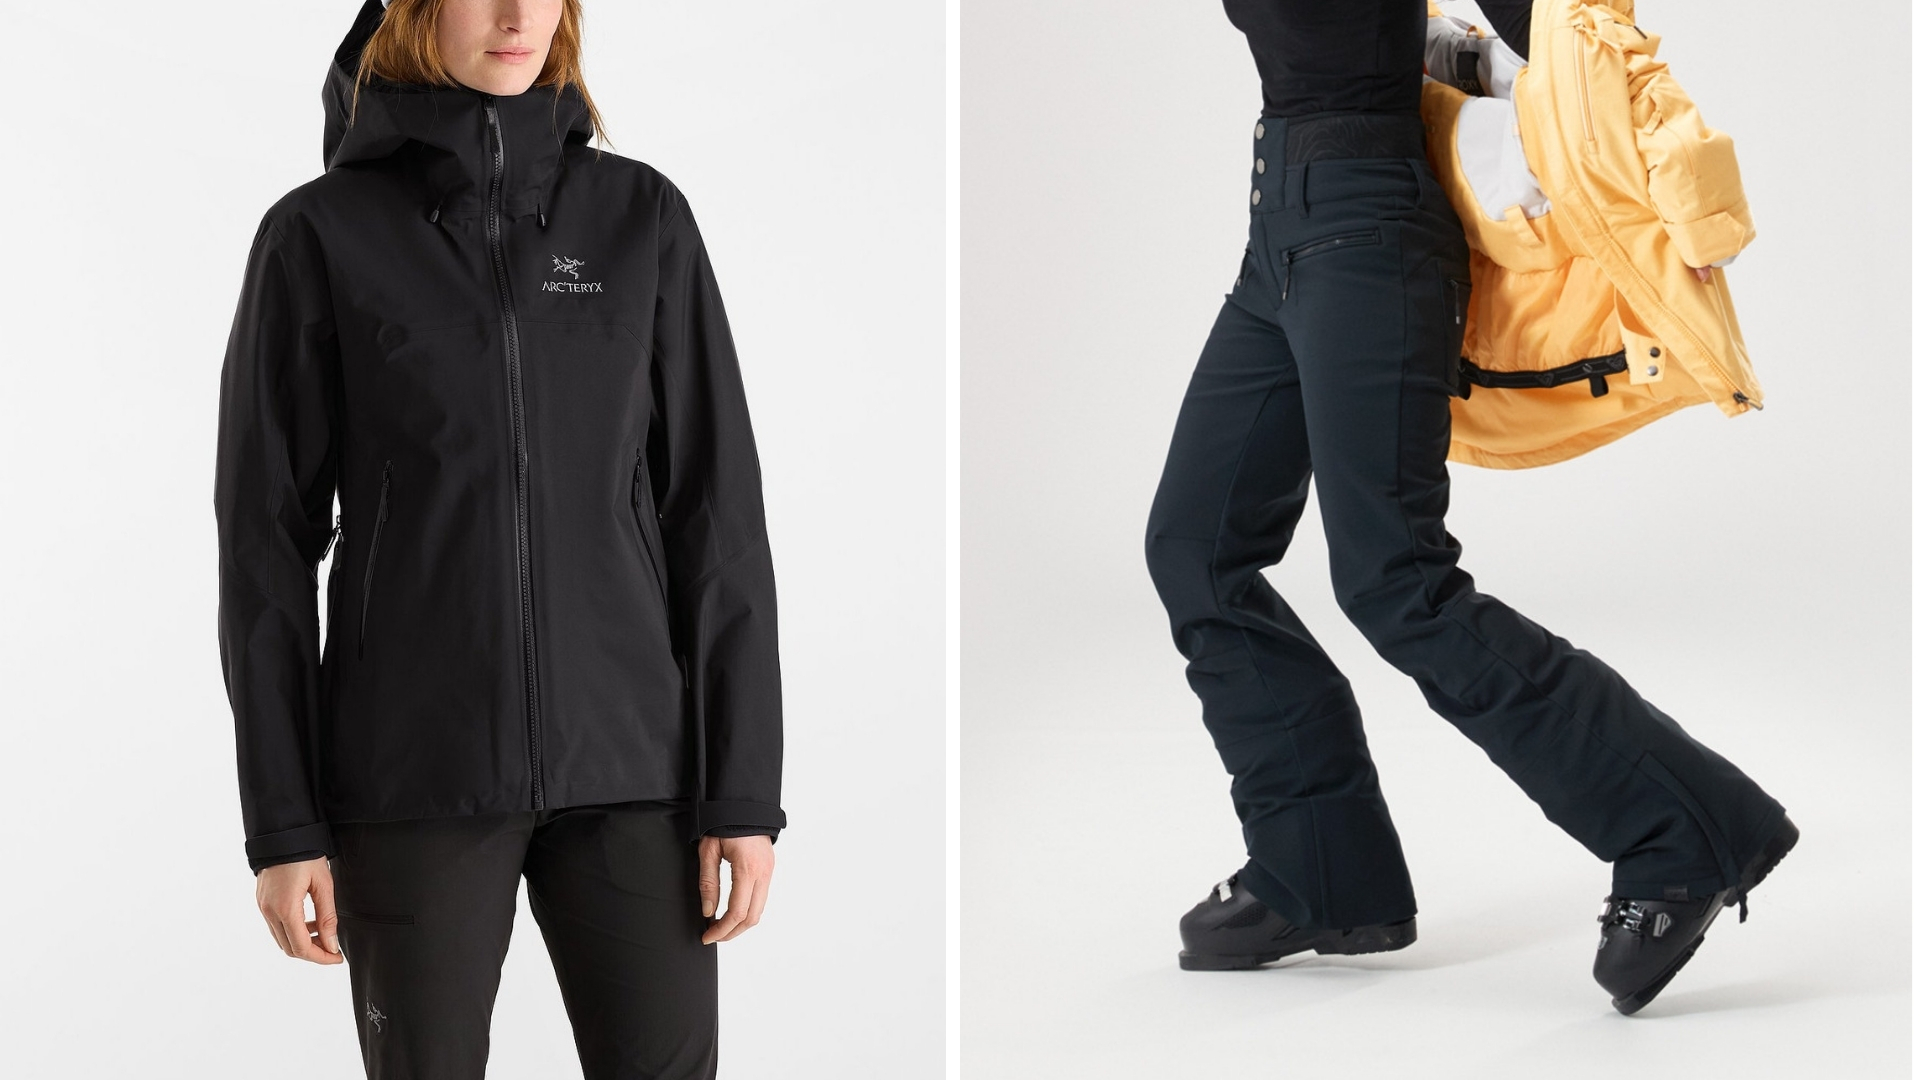 9 Pieces Of Winter Activewear And Accessories For When It’s Cold Out